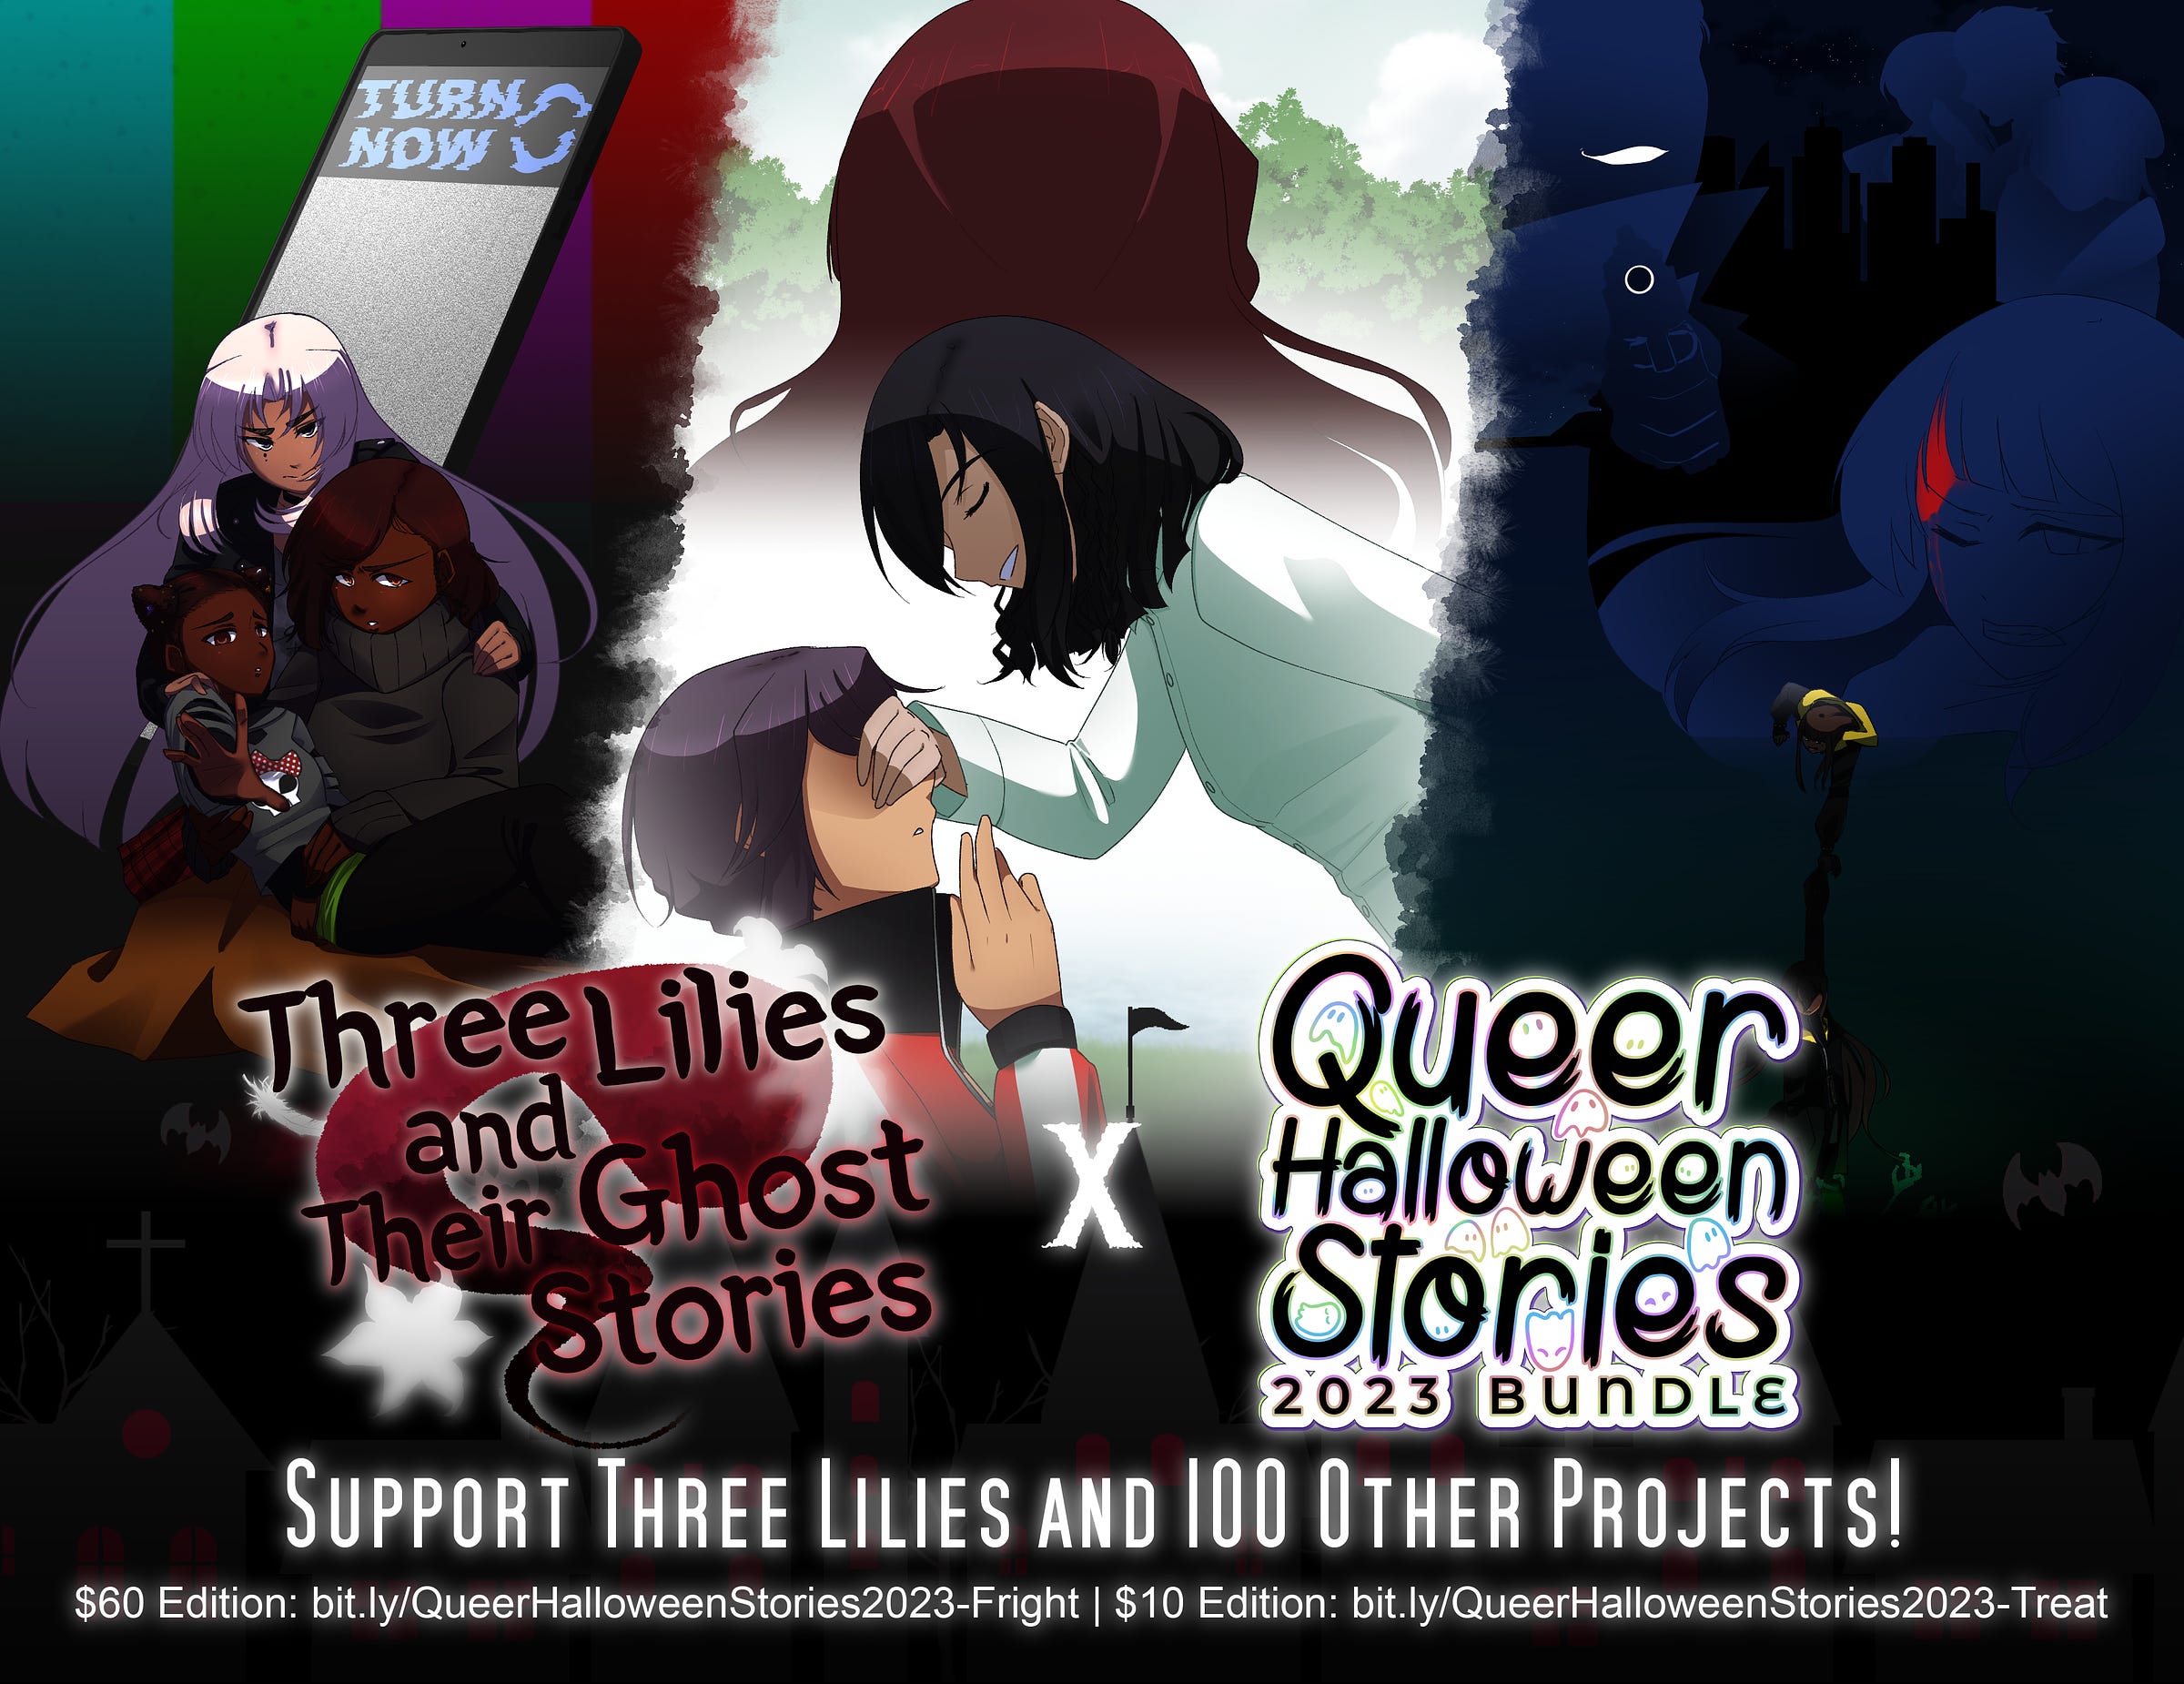 three lilies x queer halloween stories 2023 bundle promotional image. support three lilies and 100 other projects. $60 edition link: bit.ly/QueerHalloweenStories2023-Fright. $10 edition link: bit.ly/QueerHalloweenStories2023-Treat